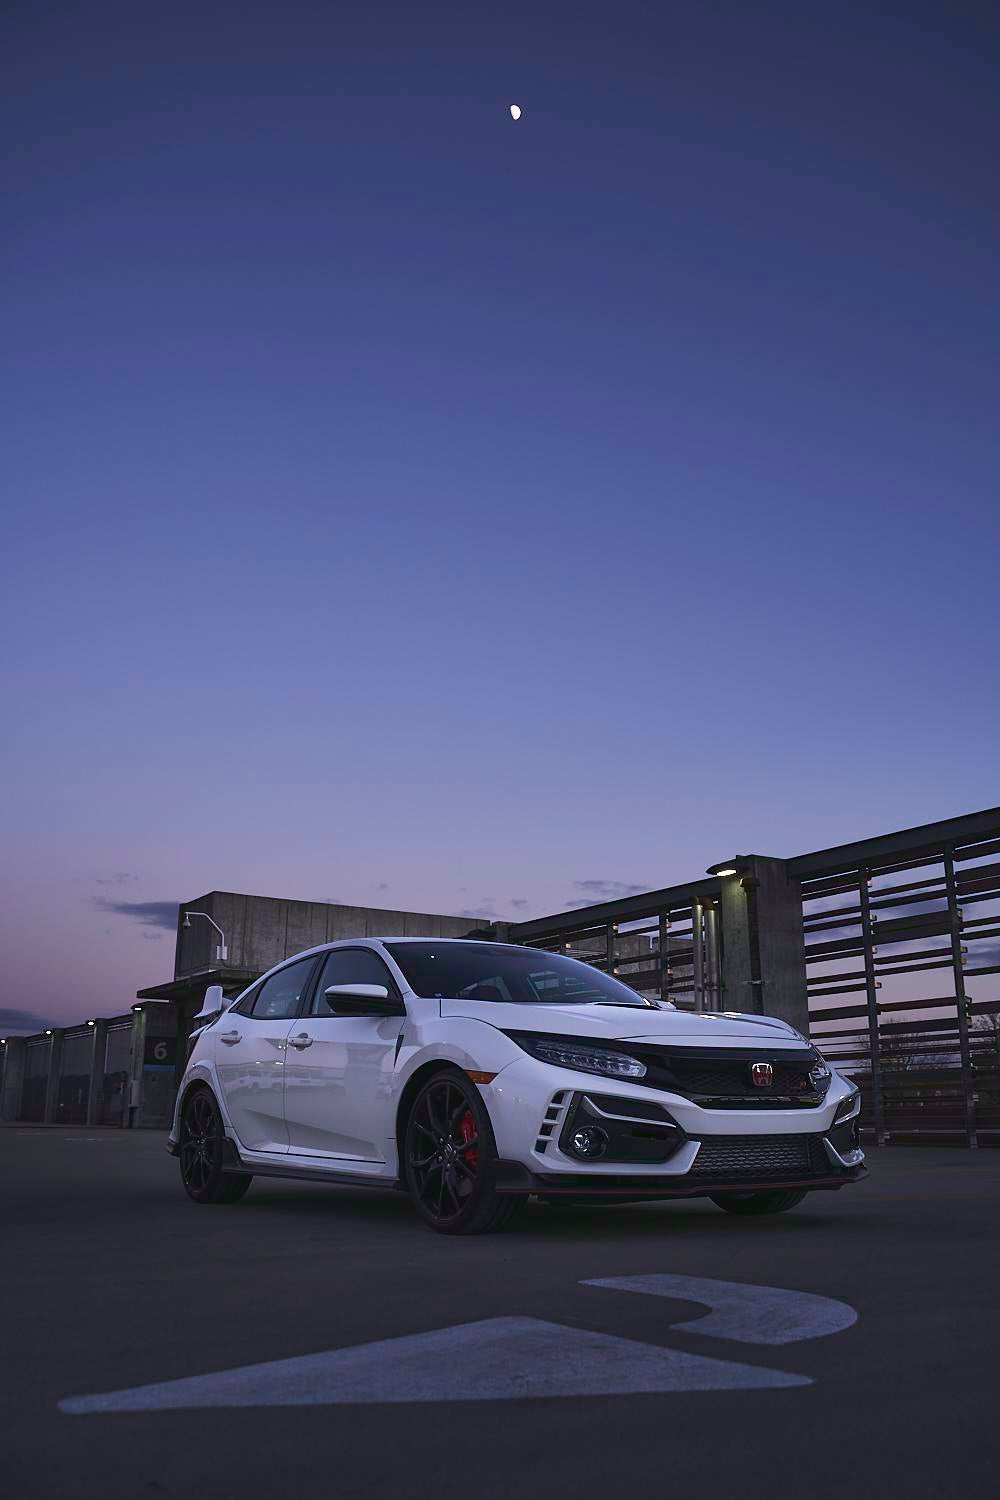 This photo of my new Honda Civic Type R is proper wallpaper material